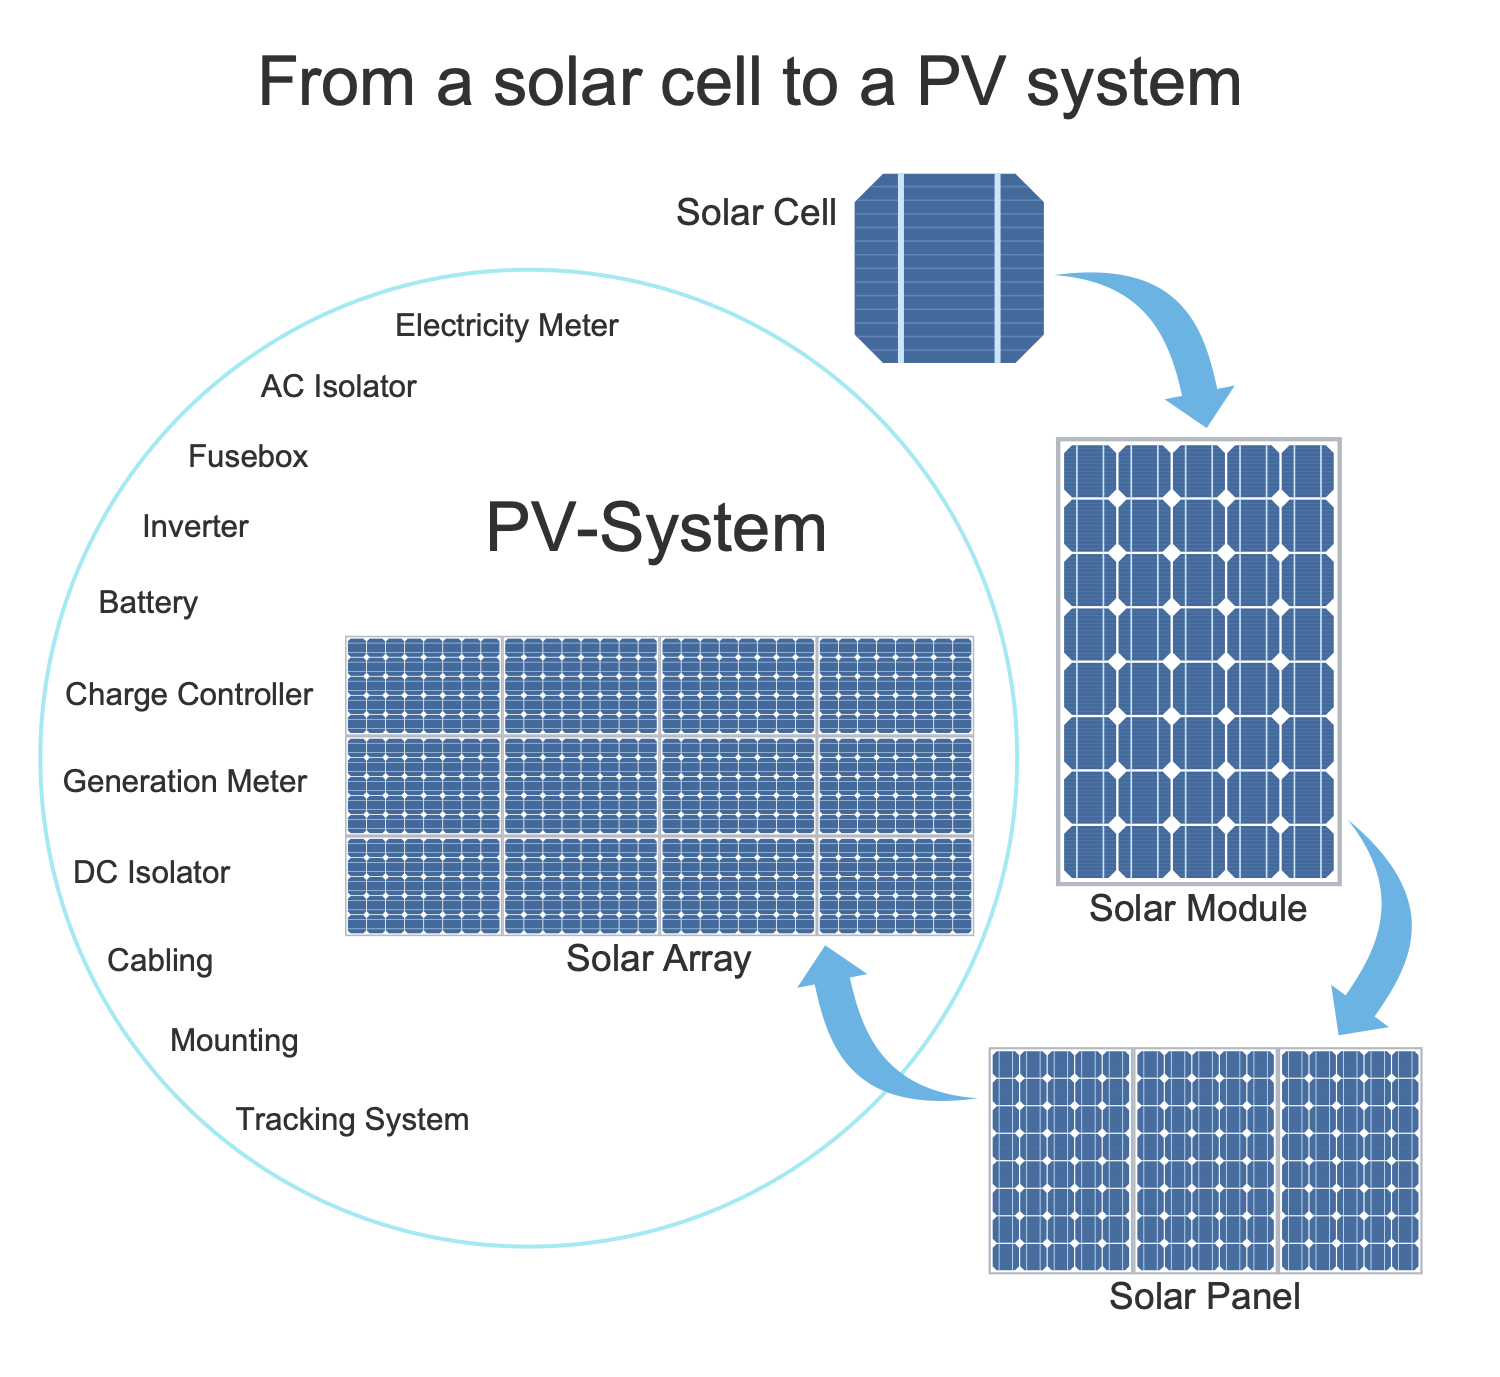 From a Solar Cell to a PV System